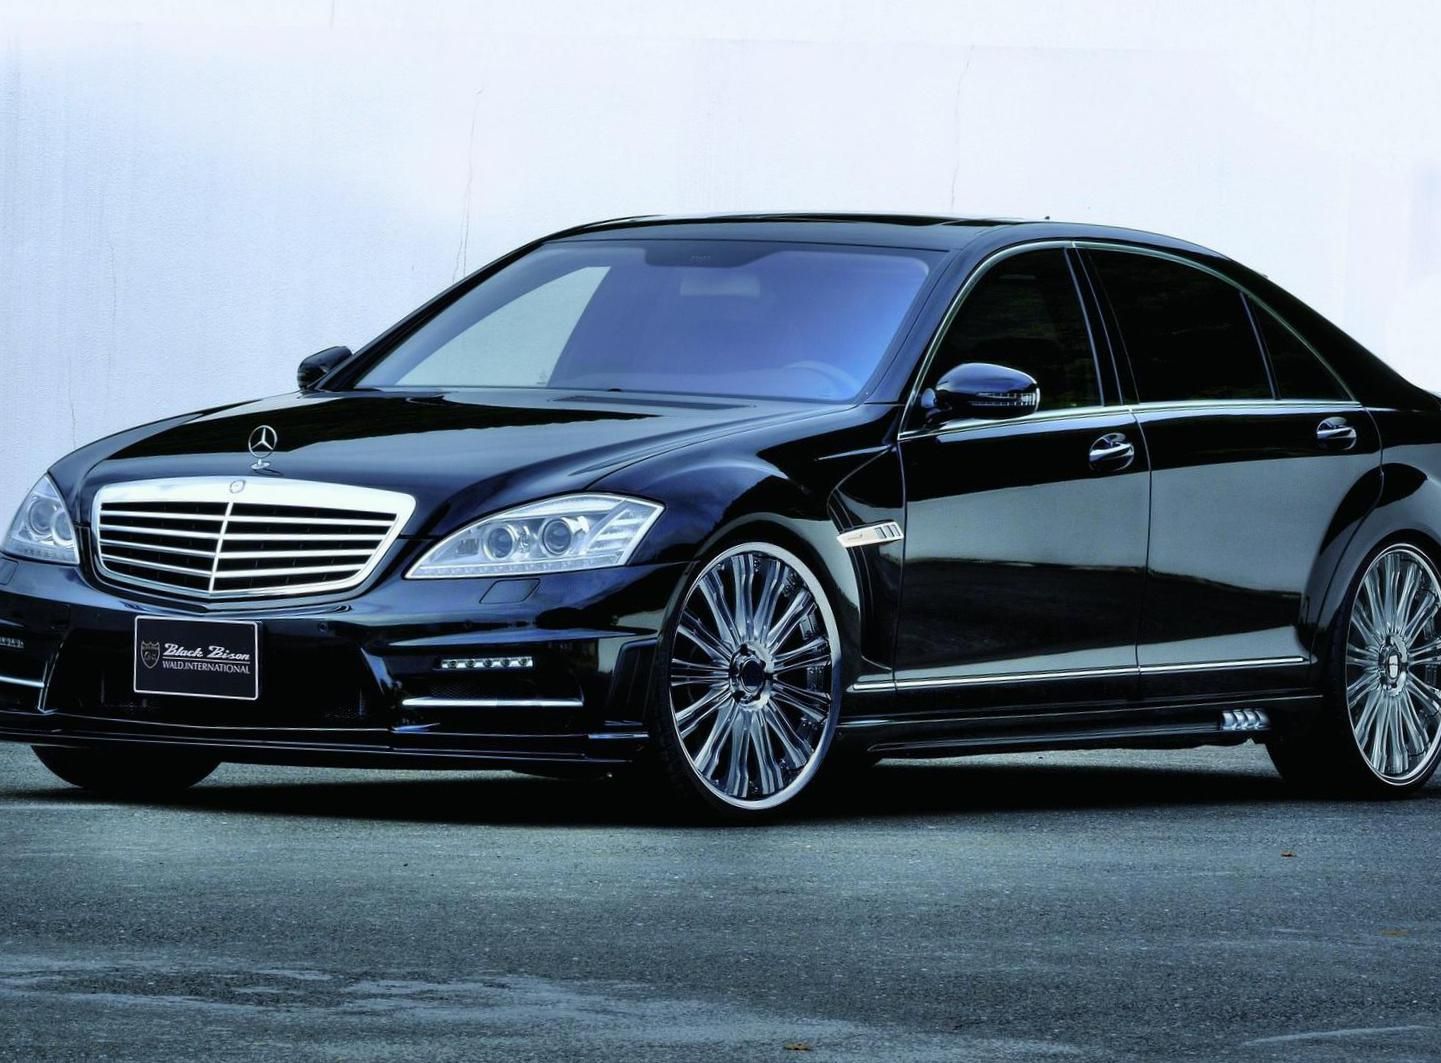 Mercedes S Class (W221) Photo And Specs. Photo: Mercedes S Class (W221) Specification And 23 Perfect Photo Of M. Benz S, Mercedes Benz Coupe, Mercedes S Class